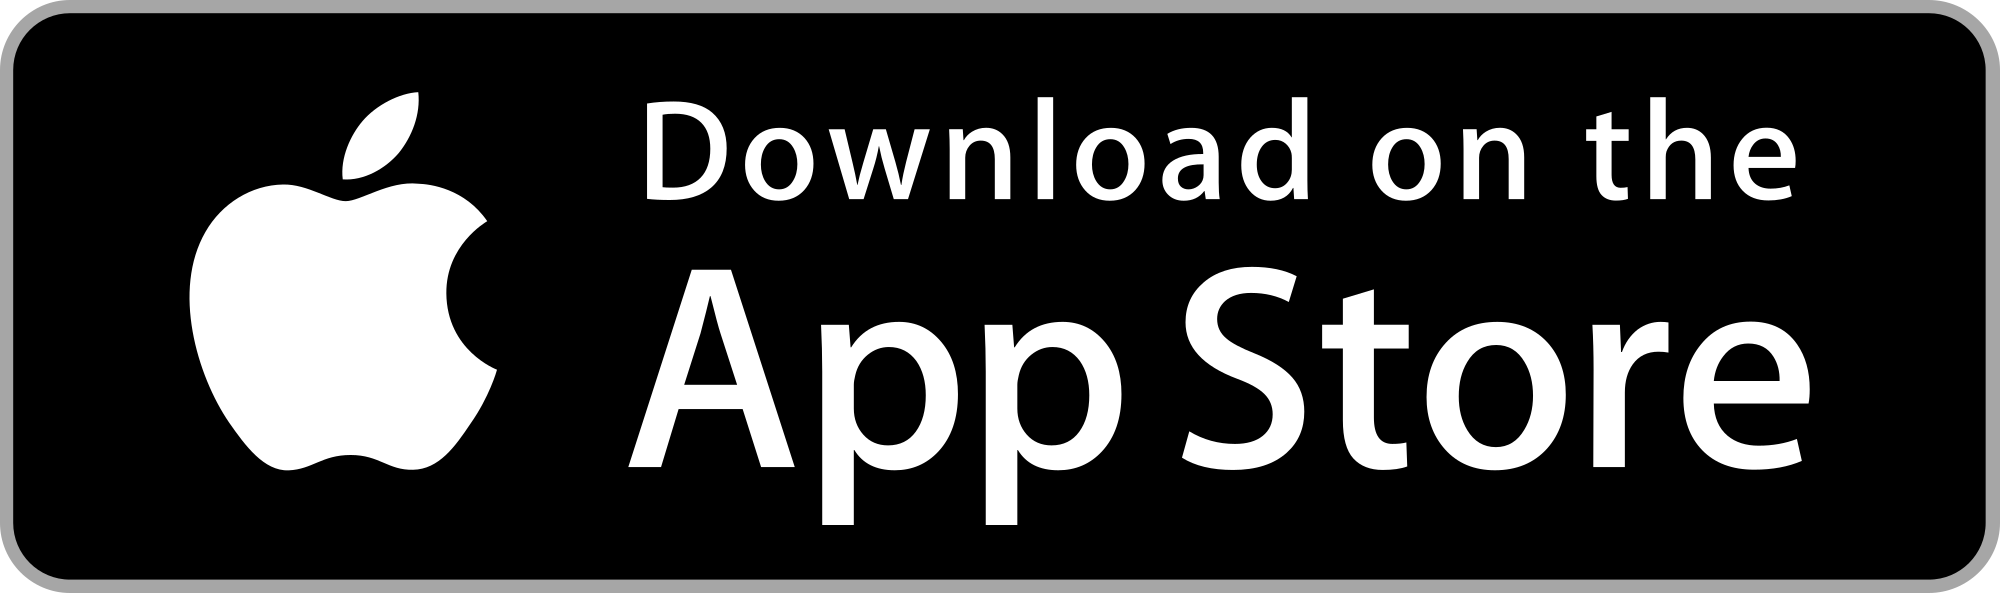 download-on-app-store-png-how-to-download-the-app-1945.png